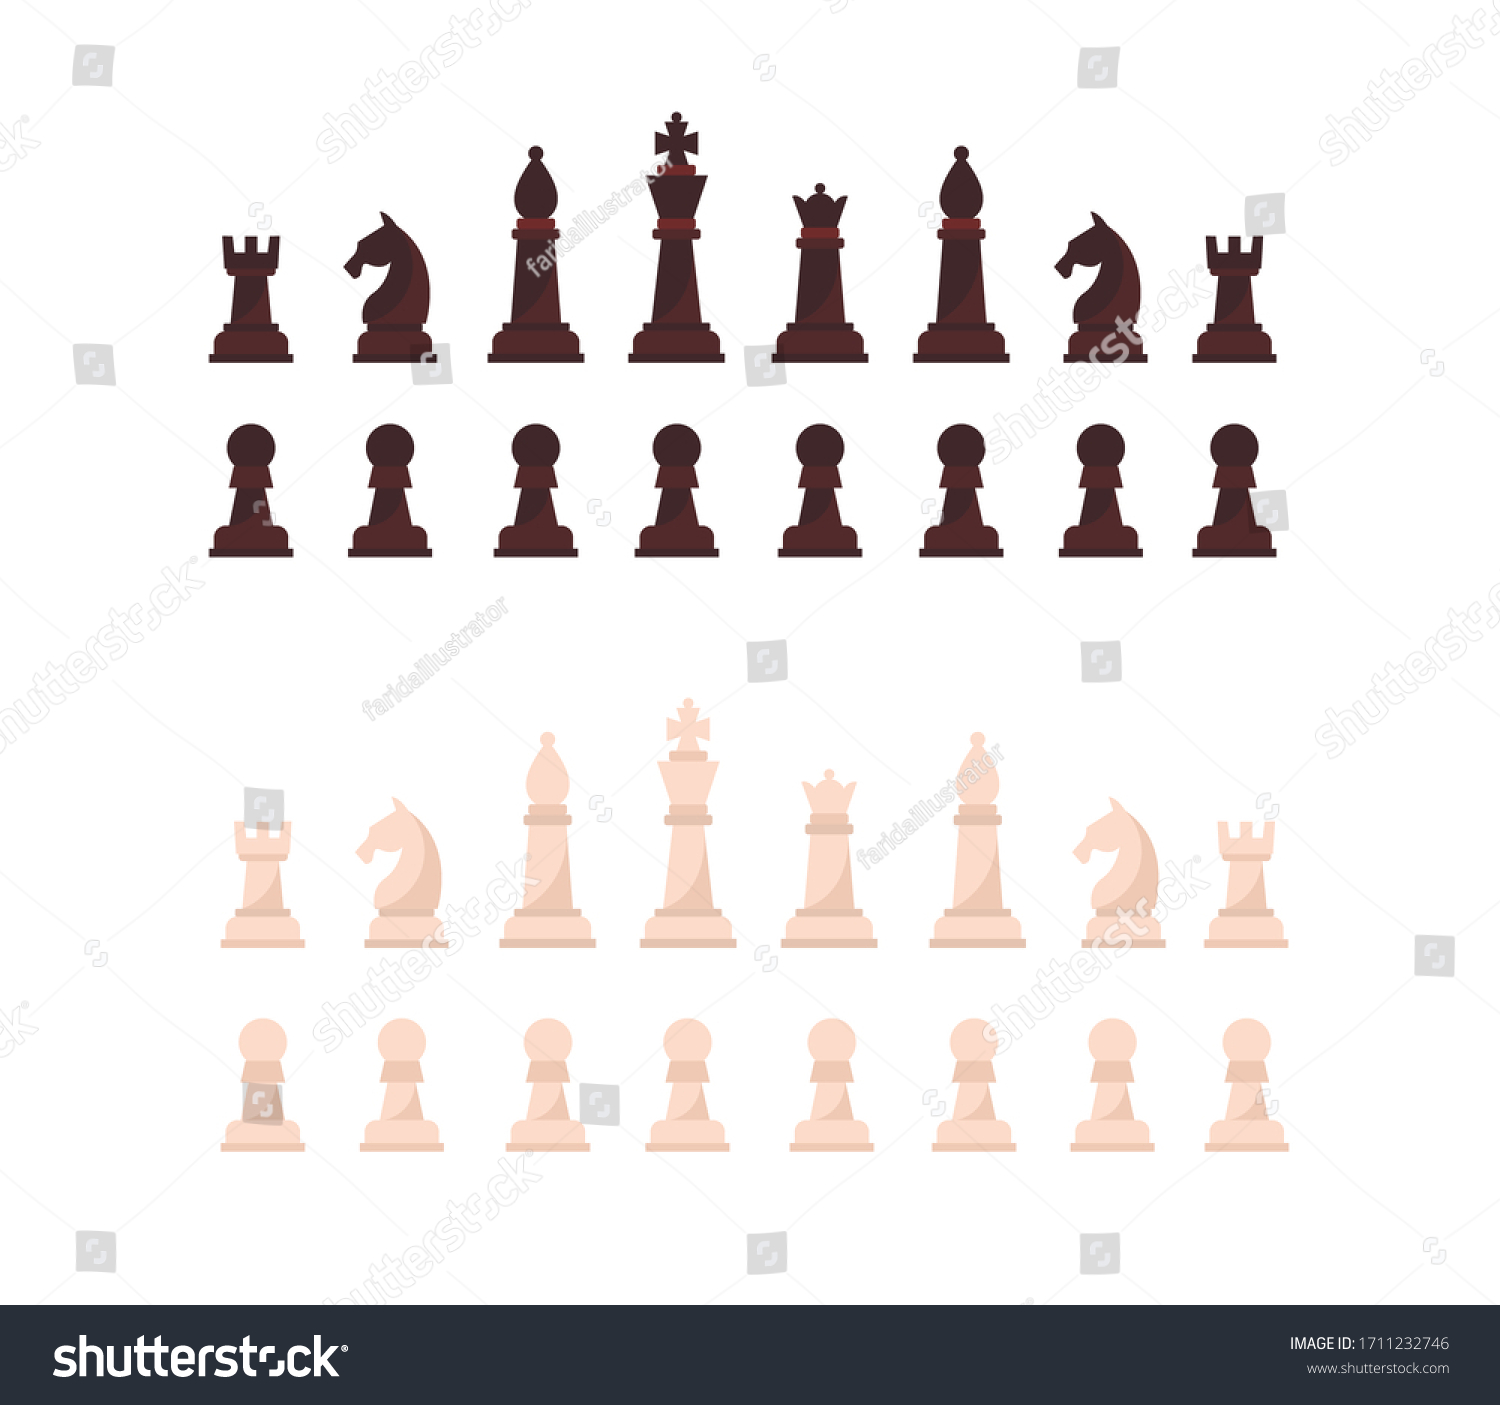 SVG of Set of all chess pieces. Black and White Chess Figures Collection, Chess Pieces, Queen, King, Knight, Pawn Vector Illustration svg